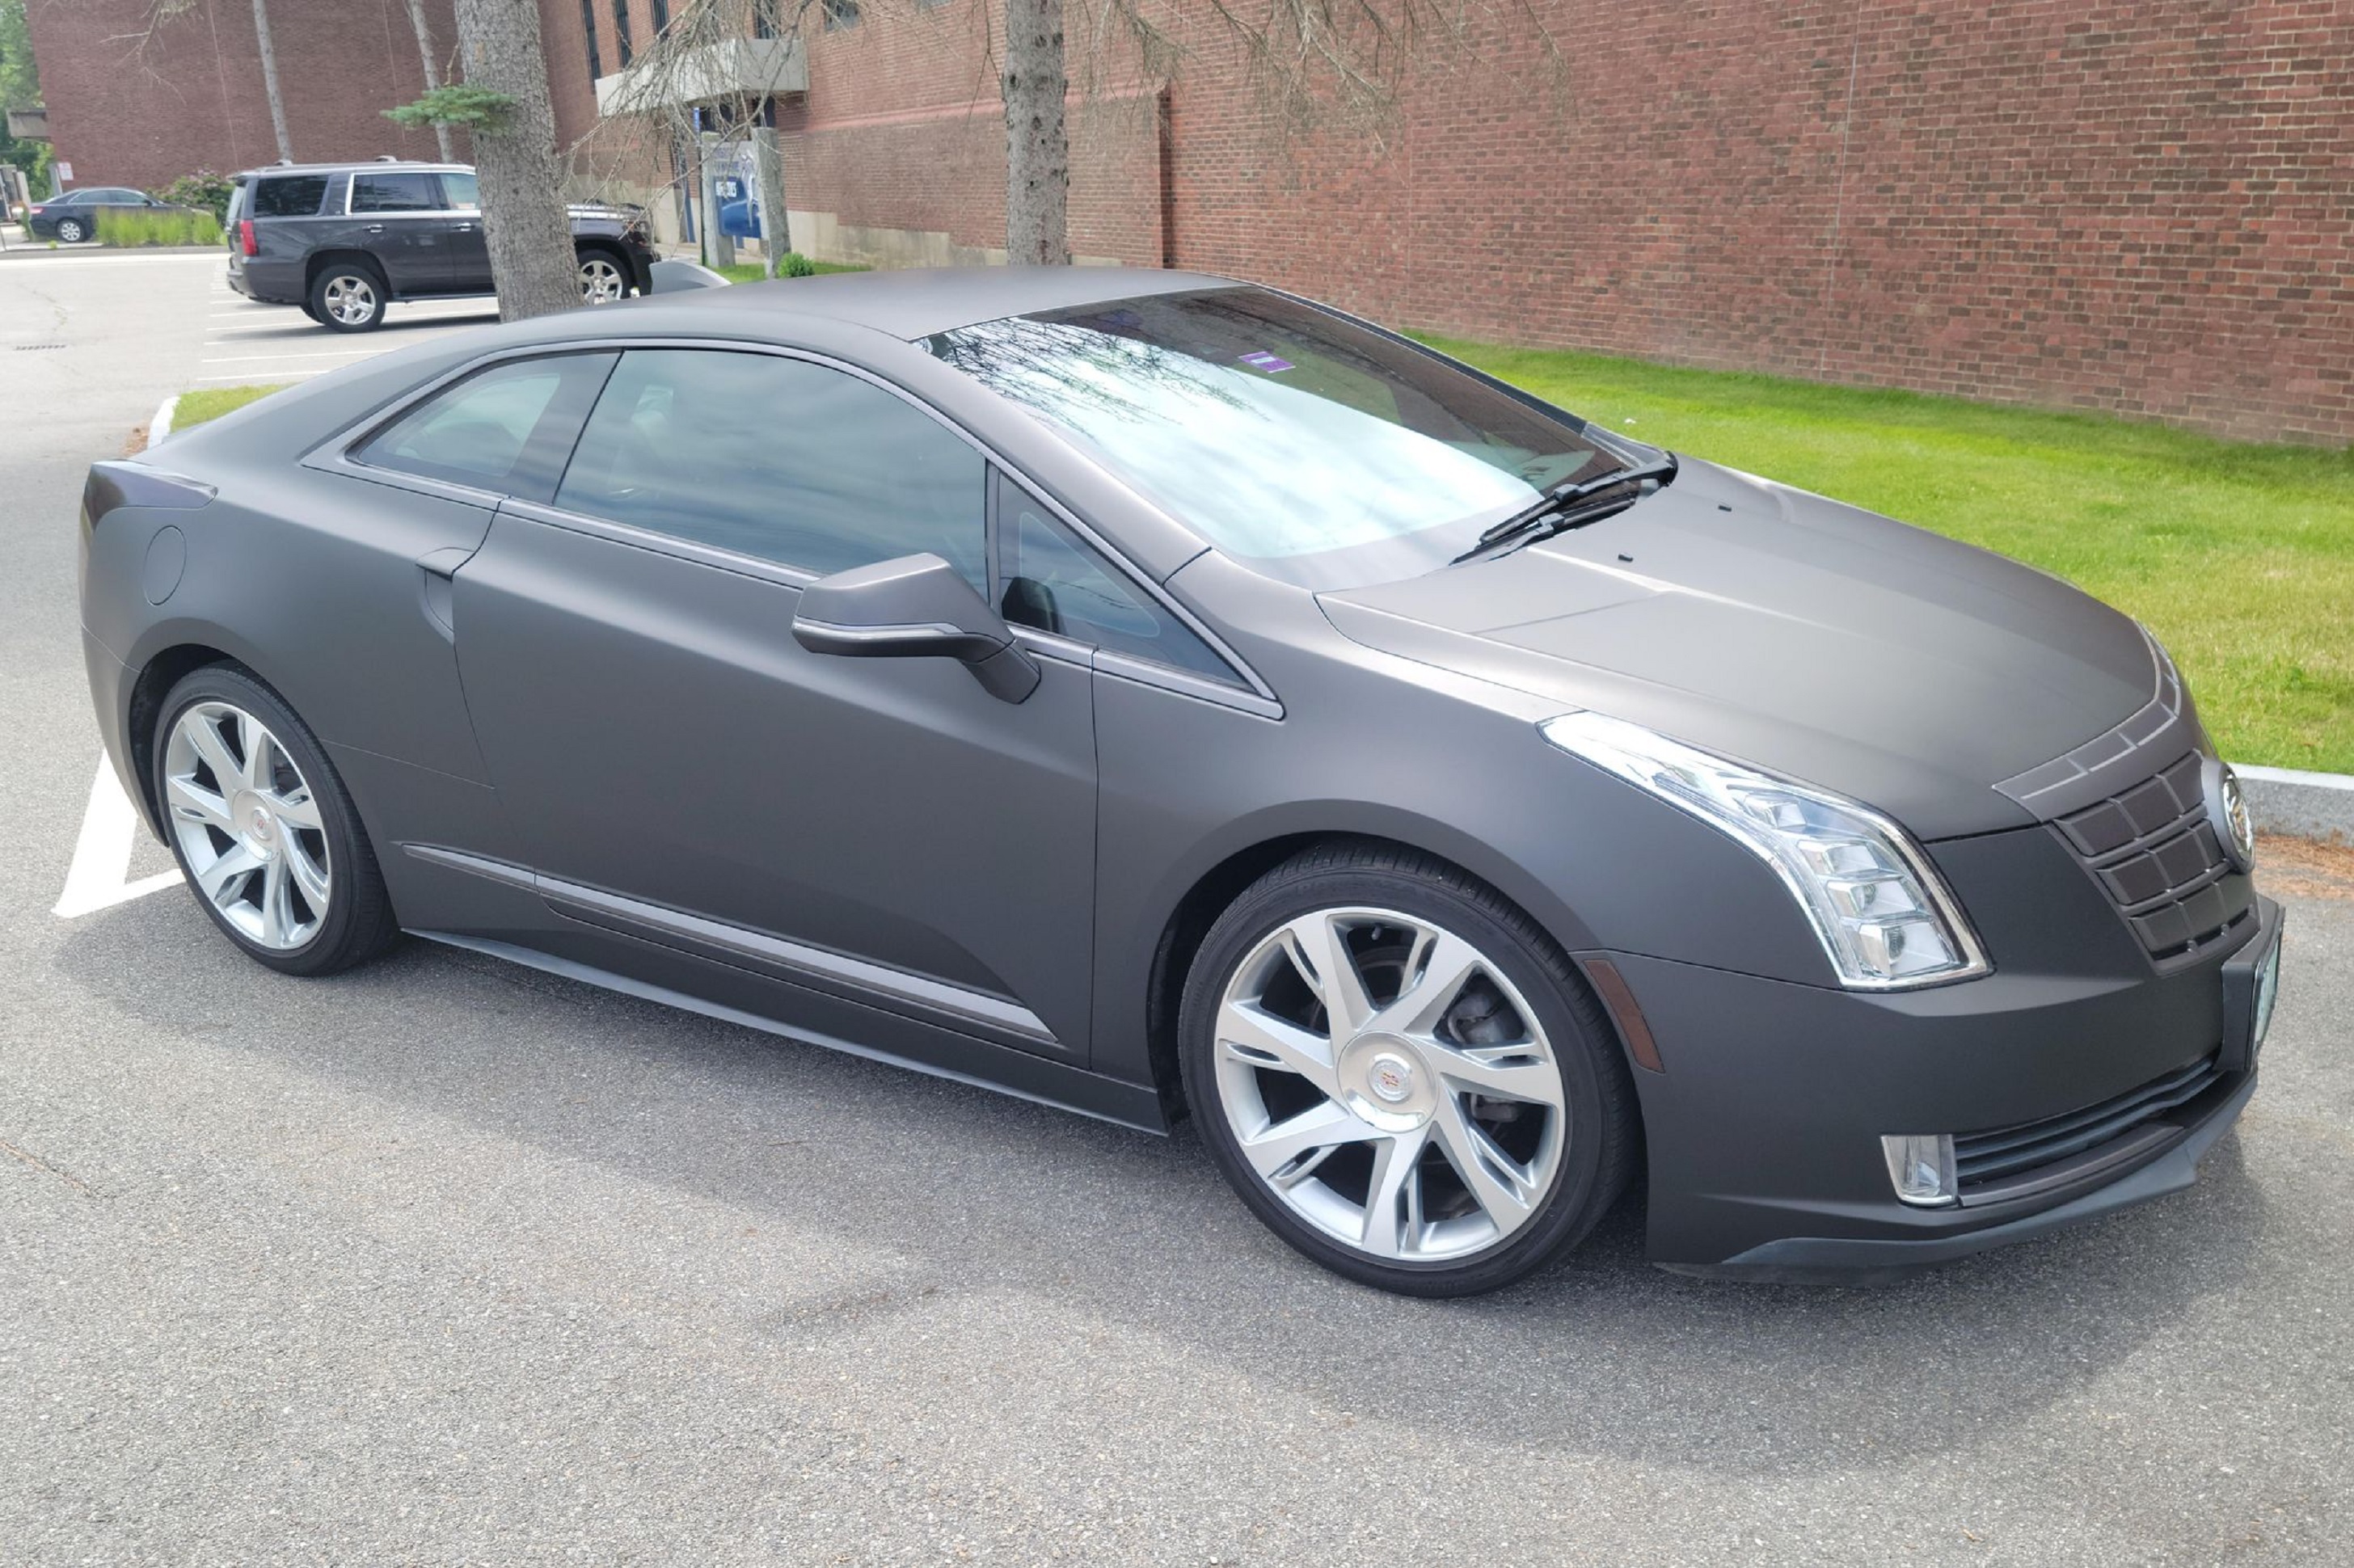 A 2014 Cadillac ELR wrapped in black in a parking lot